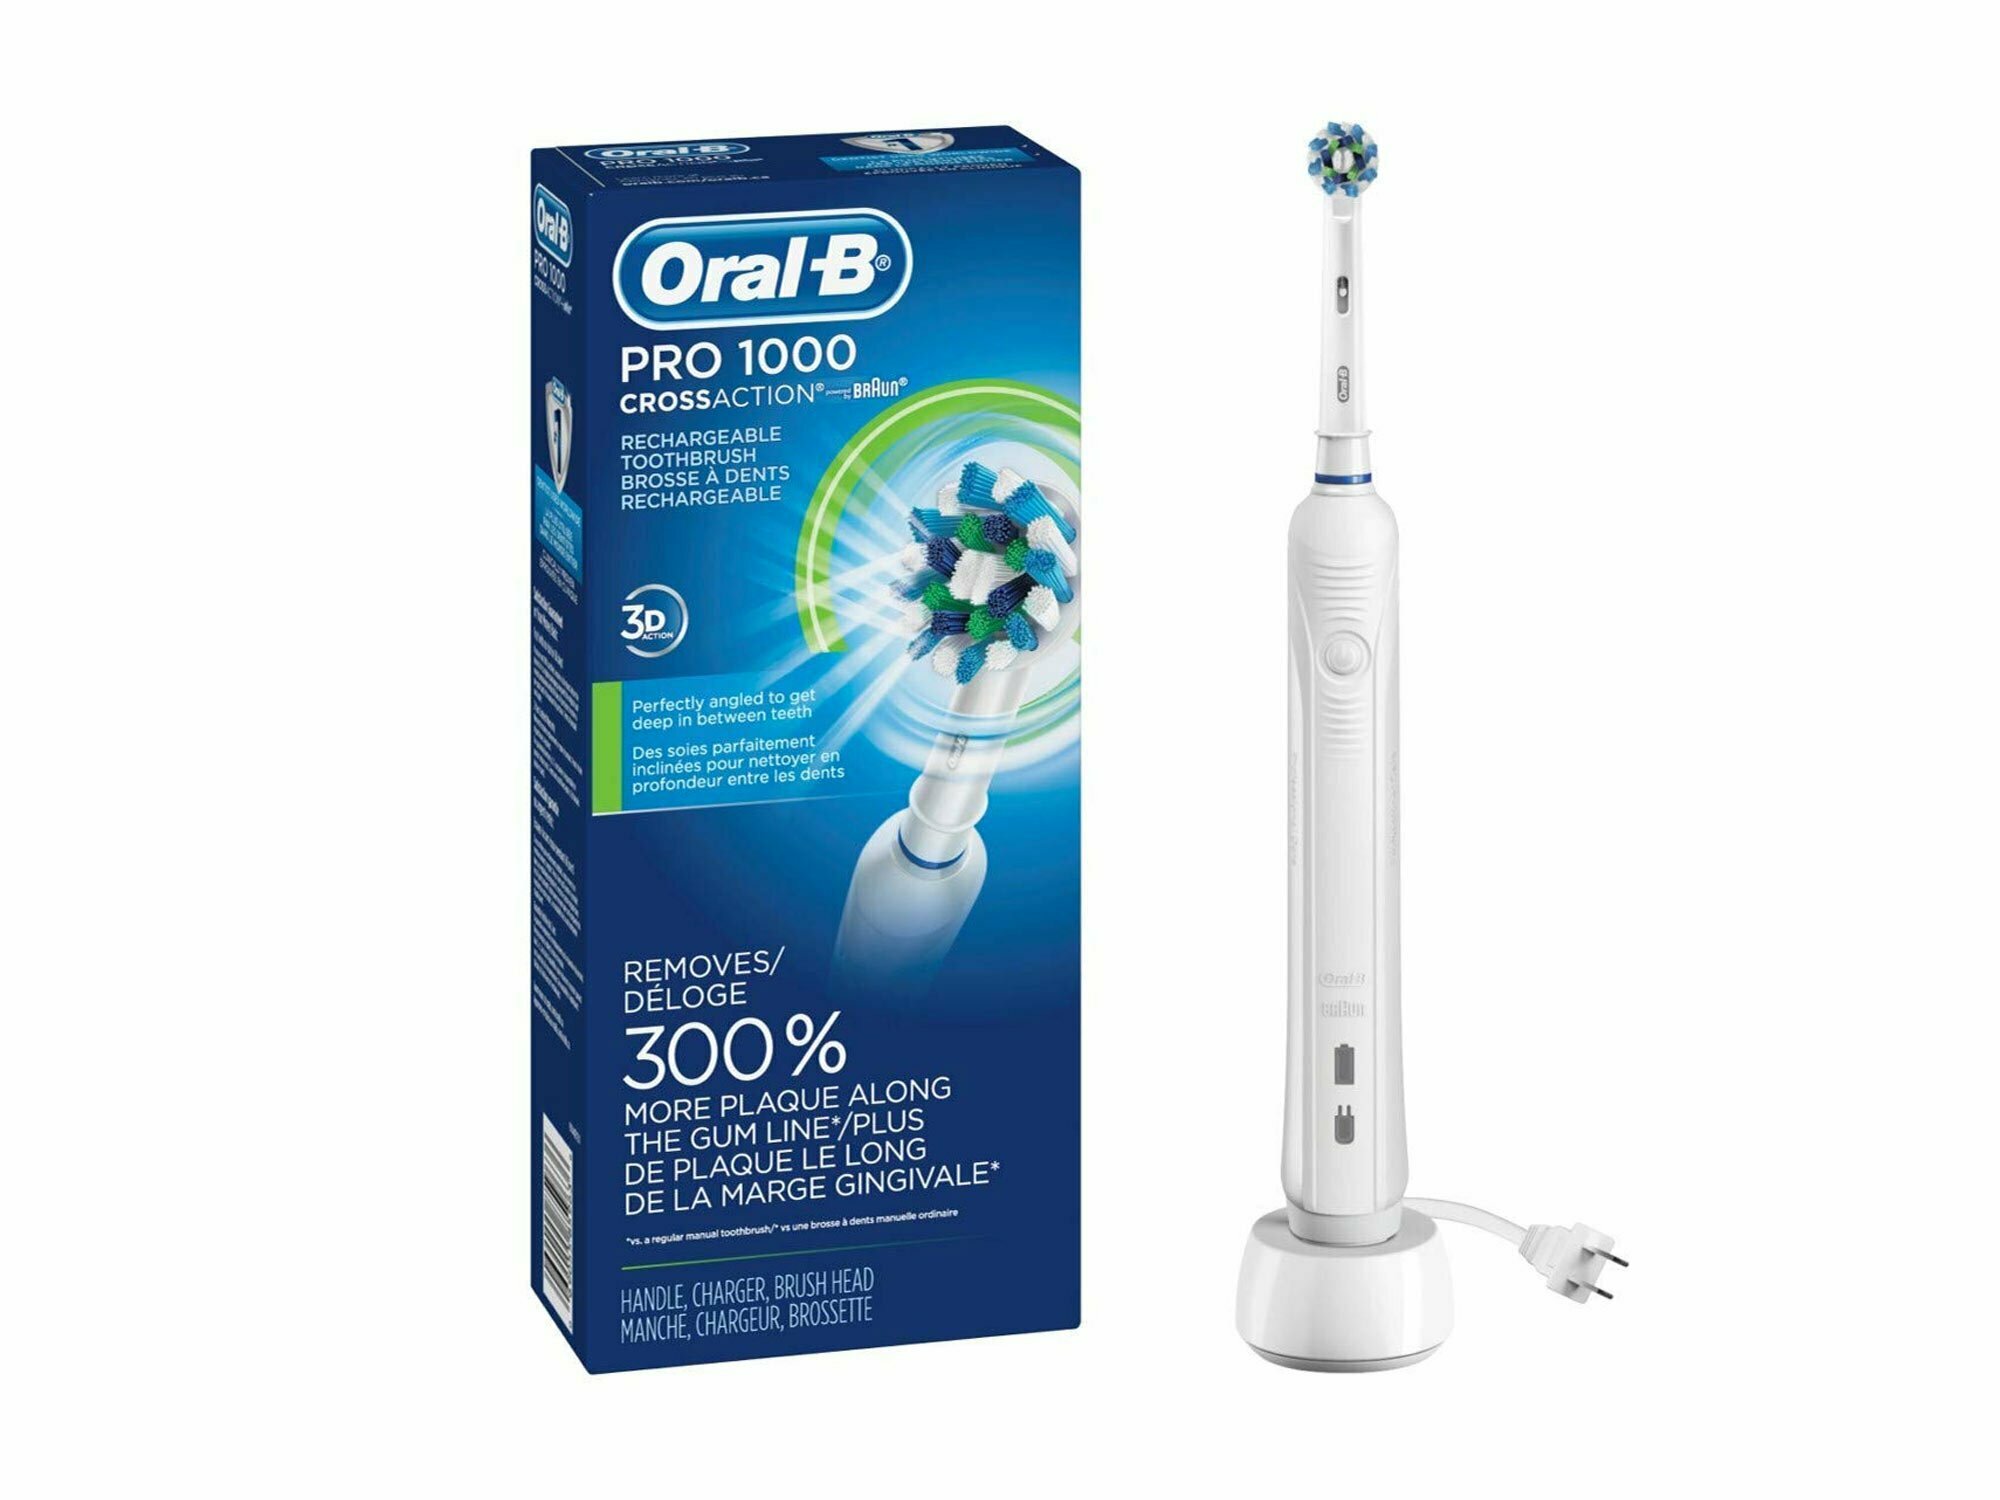 Oral-B White Pro 1000 power rechargeable electric toothbrush